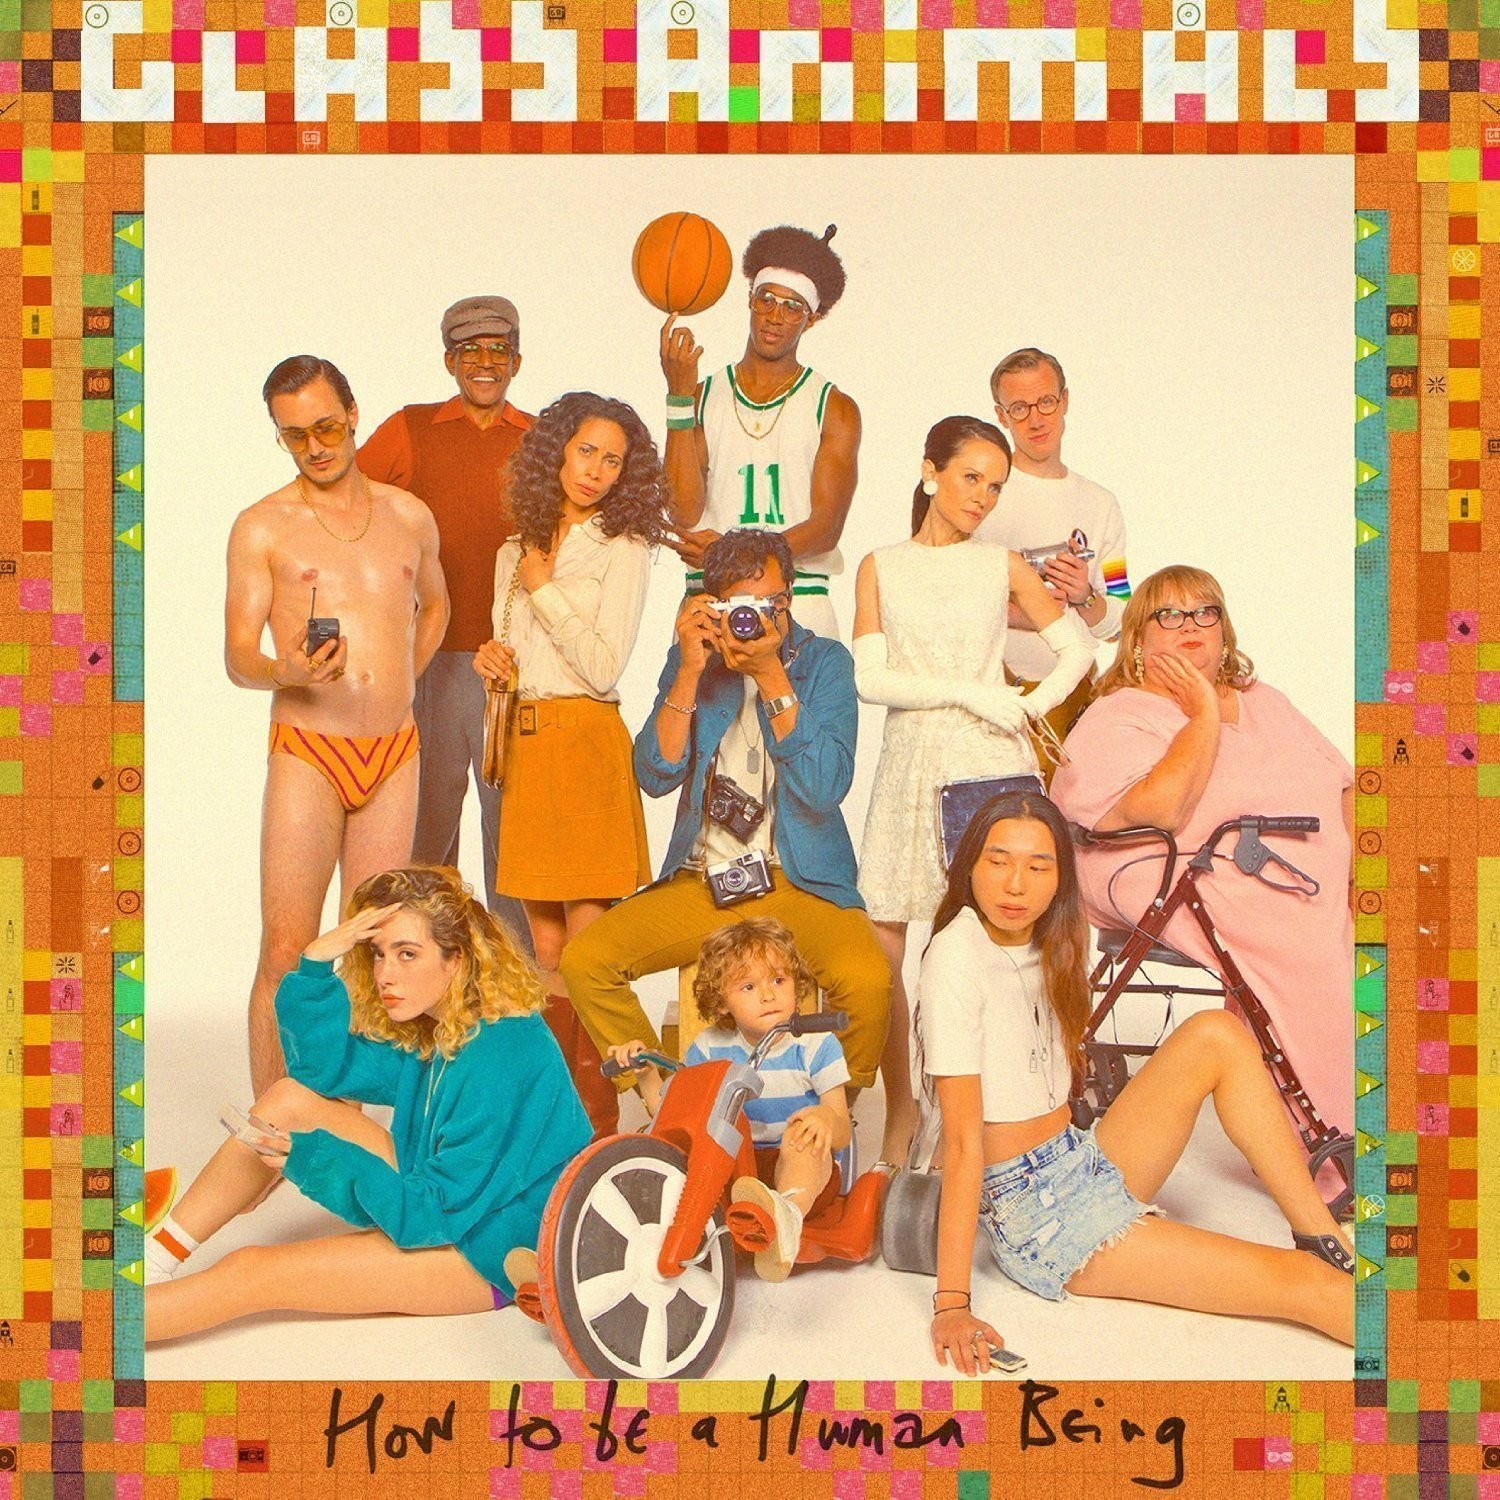 Vinyl Record Glass Animals - How To Be A Human Being (LP)